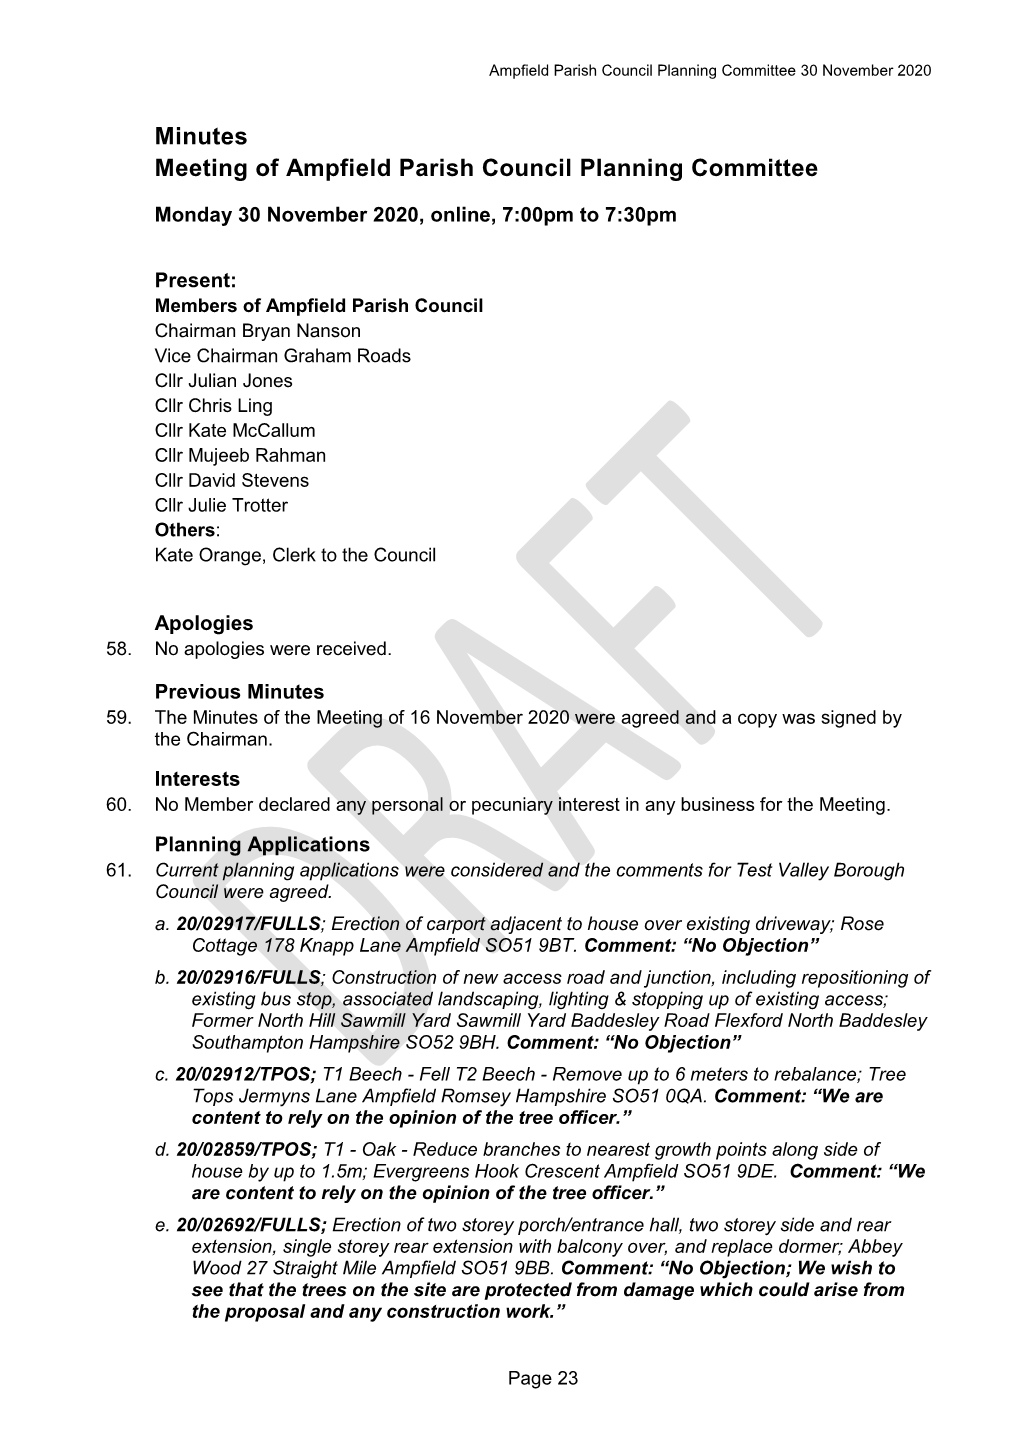 Minutes Meeting of Ampfield Parish Council Planning Committee